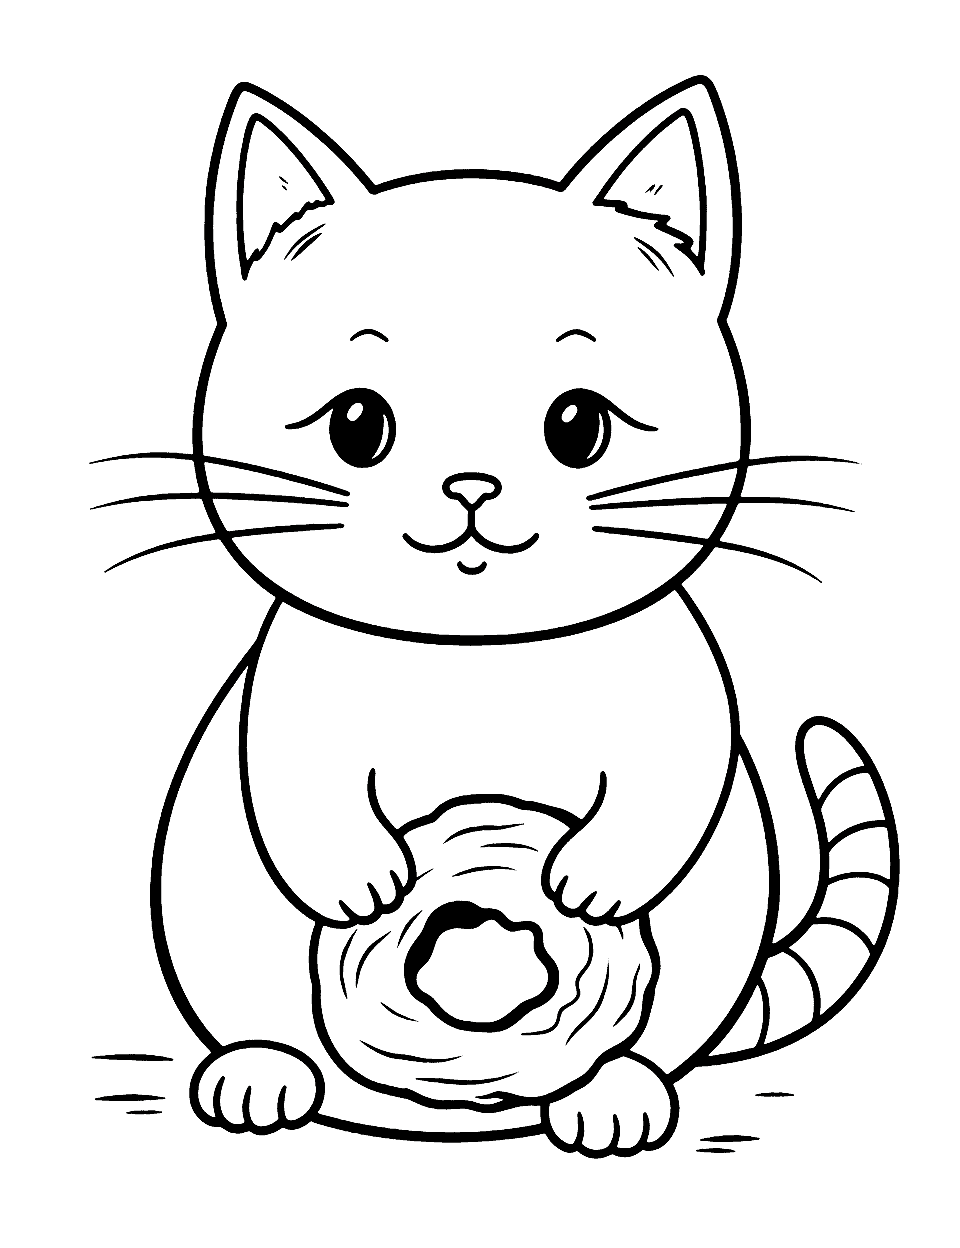 Kawaii Tabby Cat With a Donut Coloring Page - A cute kawaii-style tabby cat, happily chewing on a big, frosted donut.